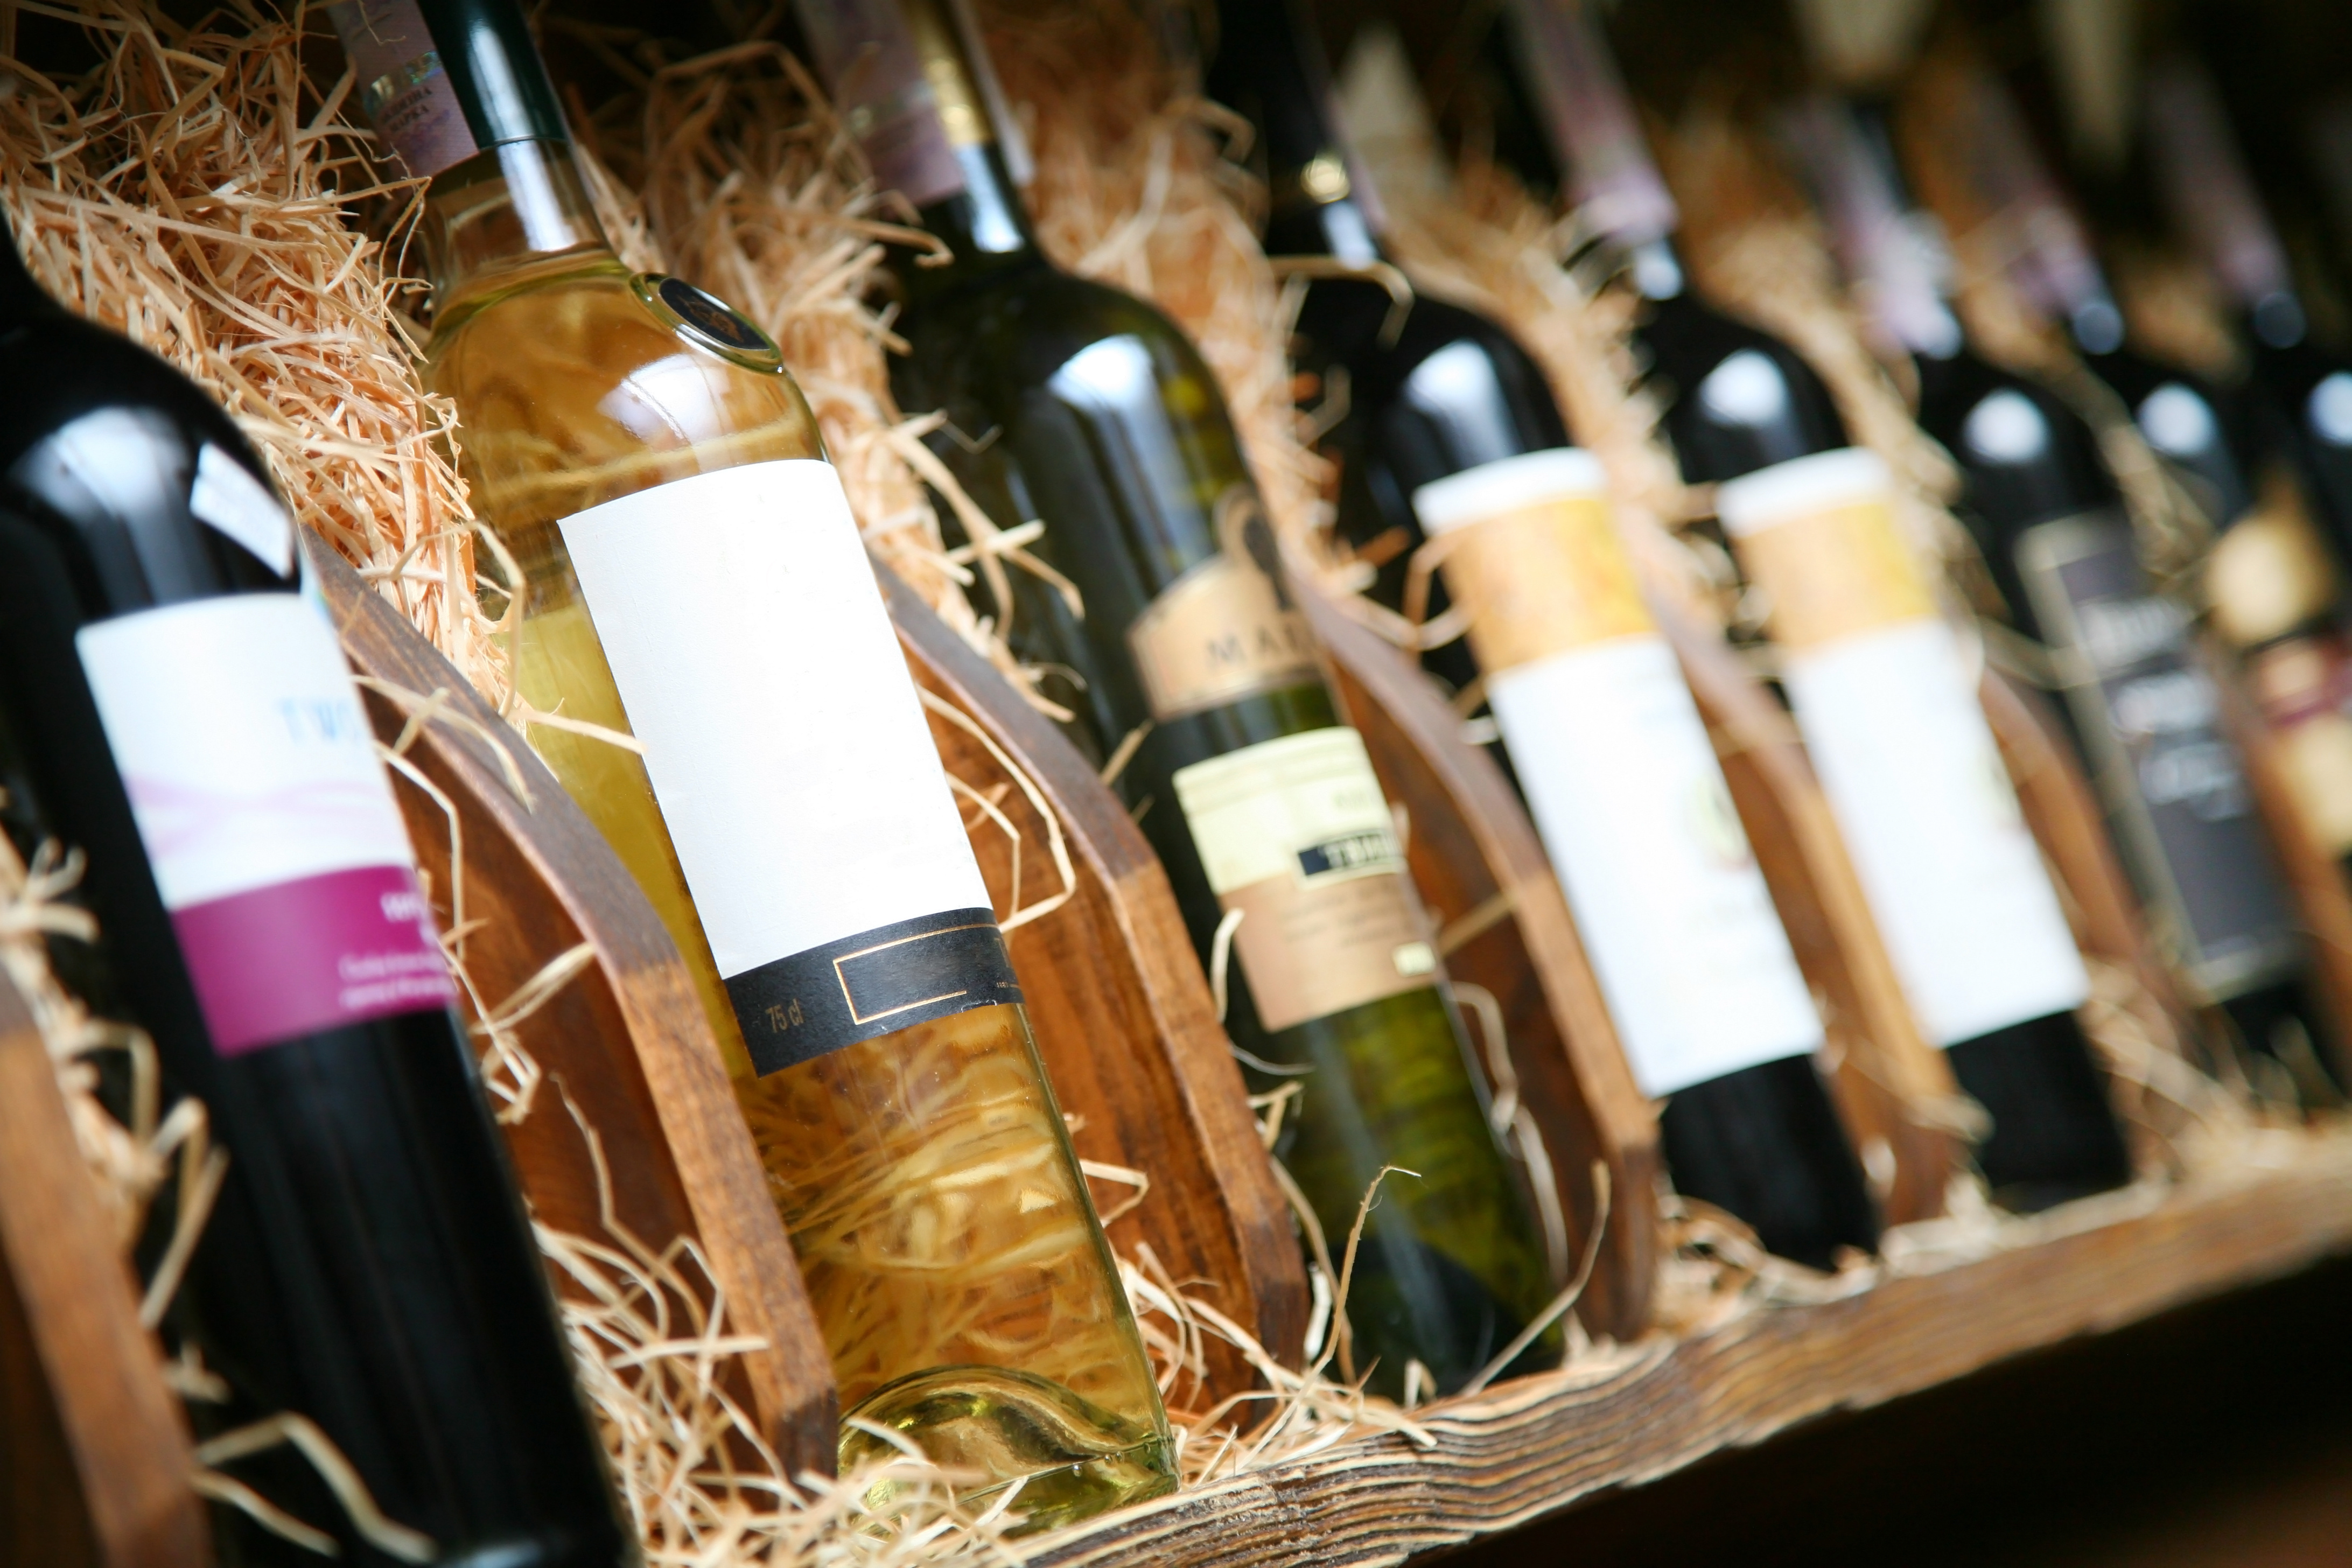 close-up-wine-bottles-over-straw